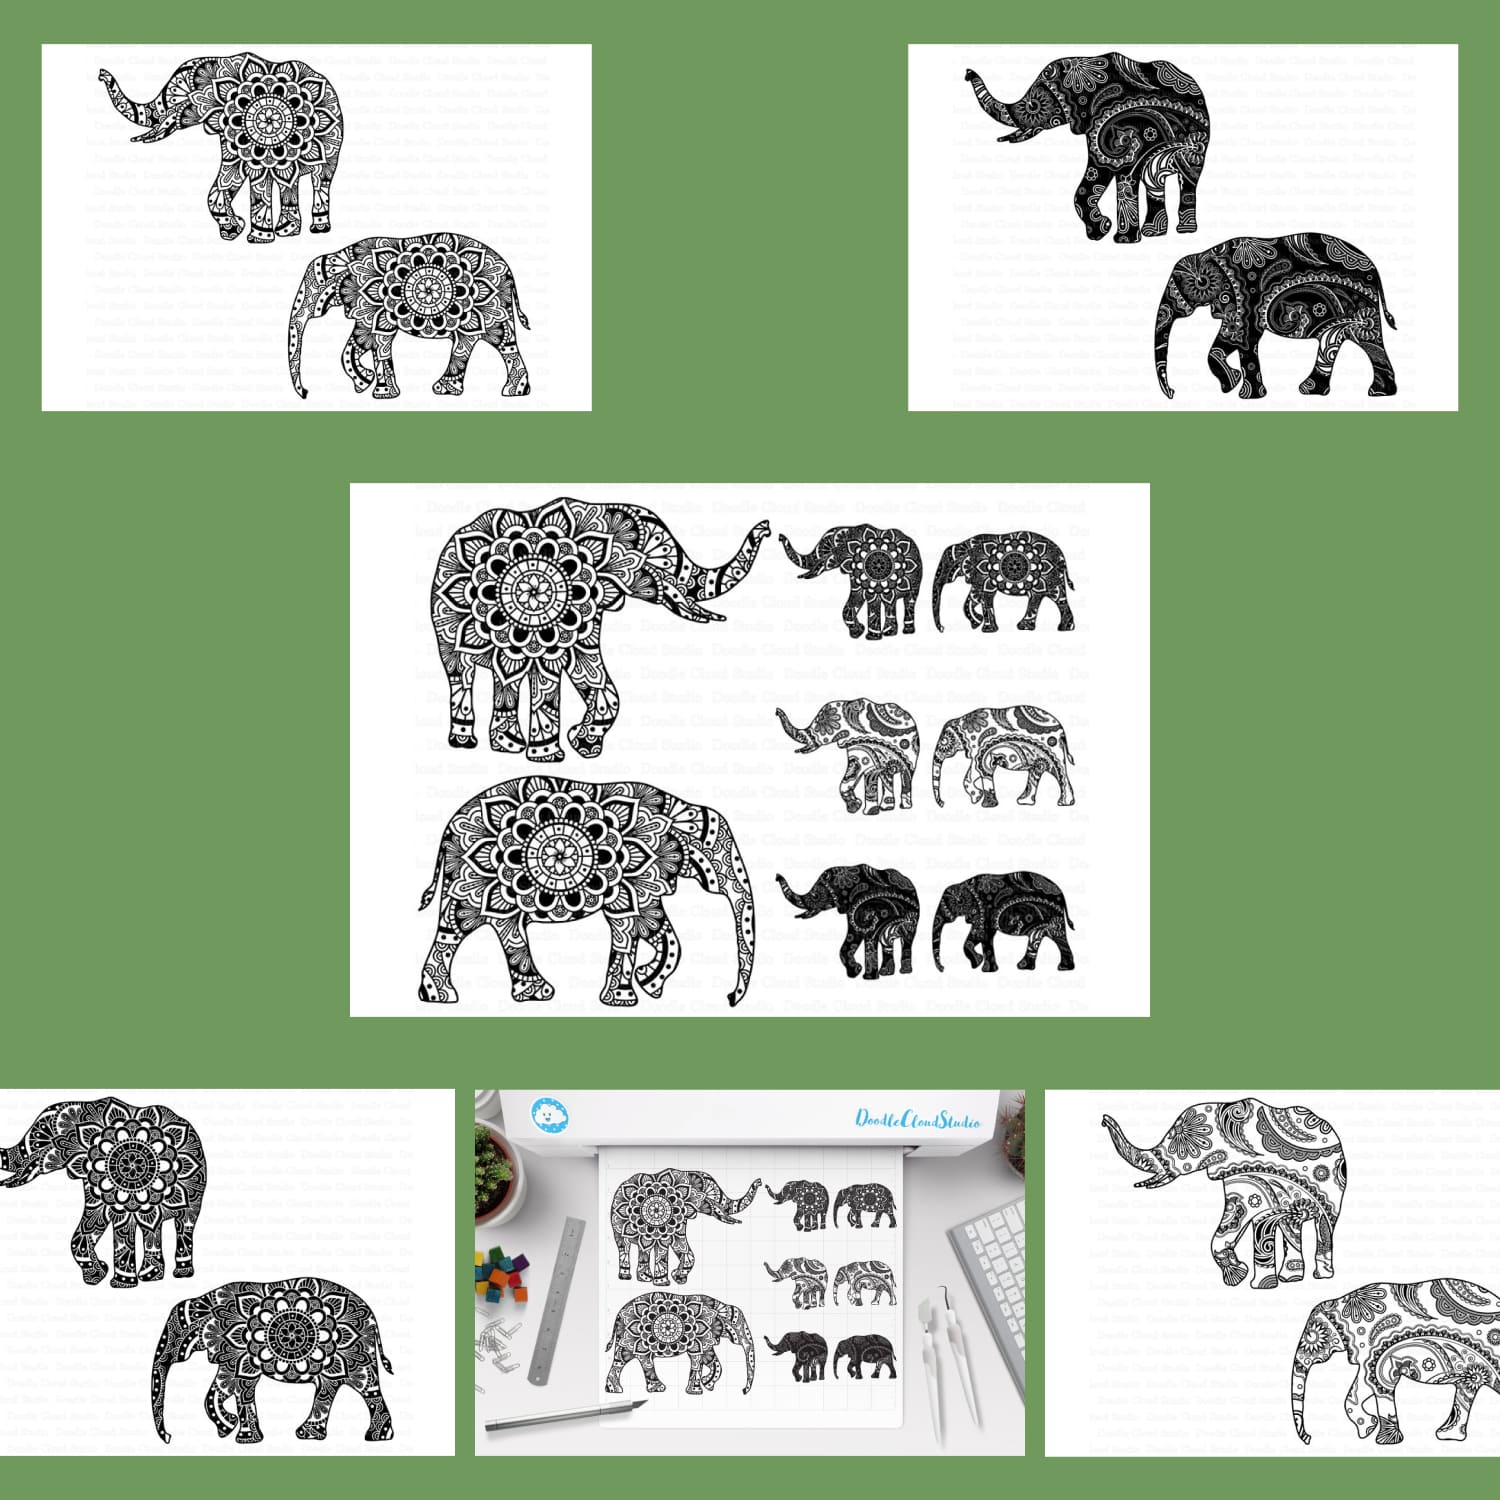 Group of elephants that are on a sheet of paper.